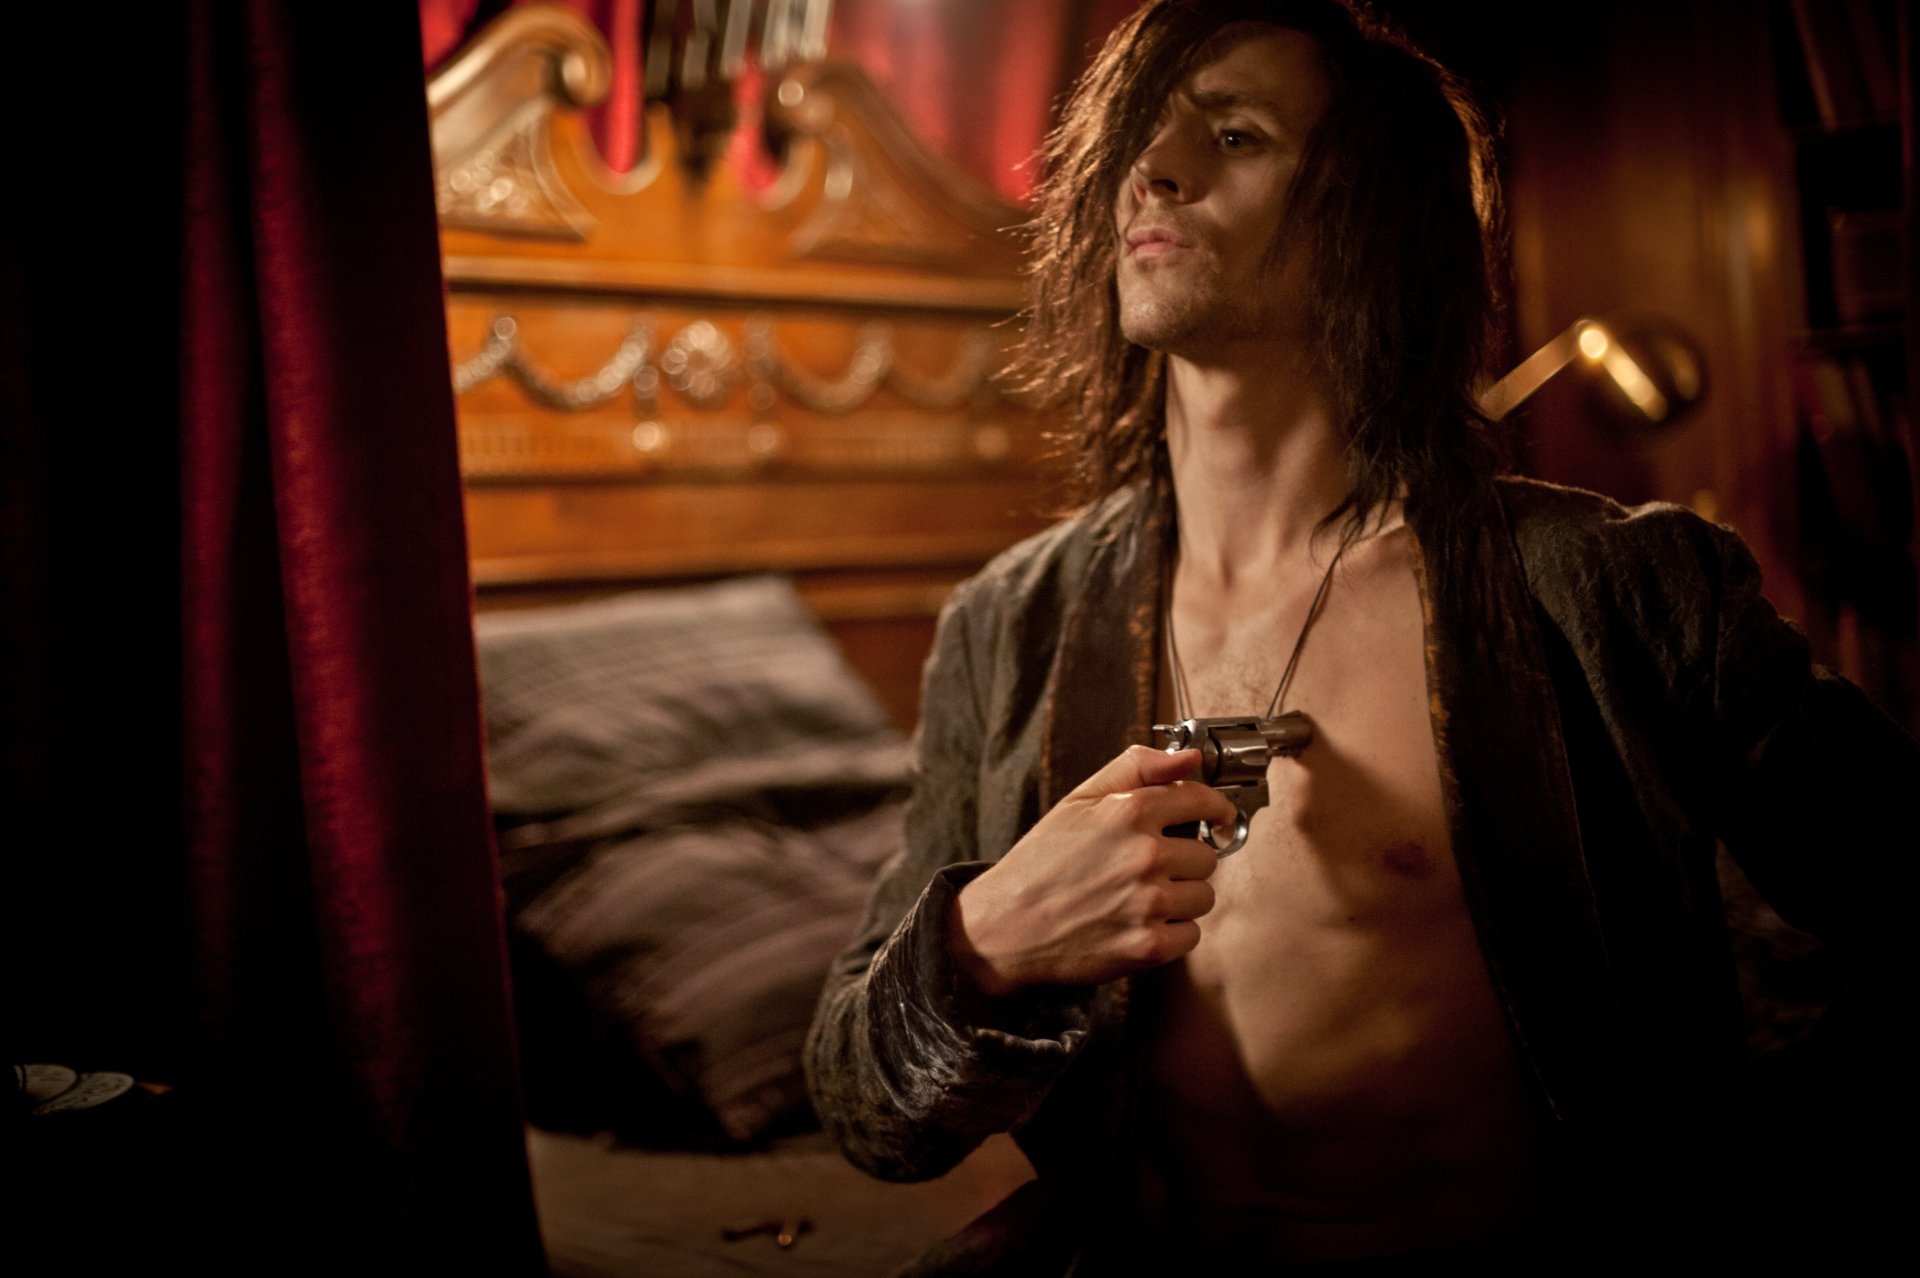 Only Lovers Left Alive movies, Samantha Simpson photos, Posted by Samantha, Wallpapers, 1920x1280 HD Desktop